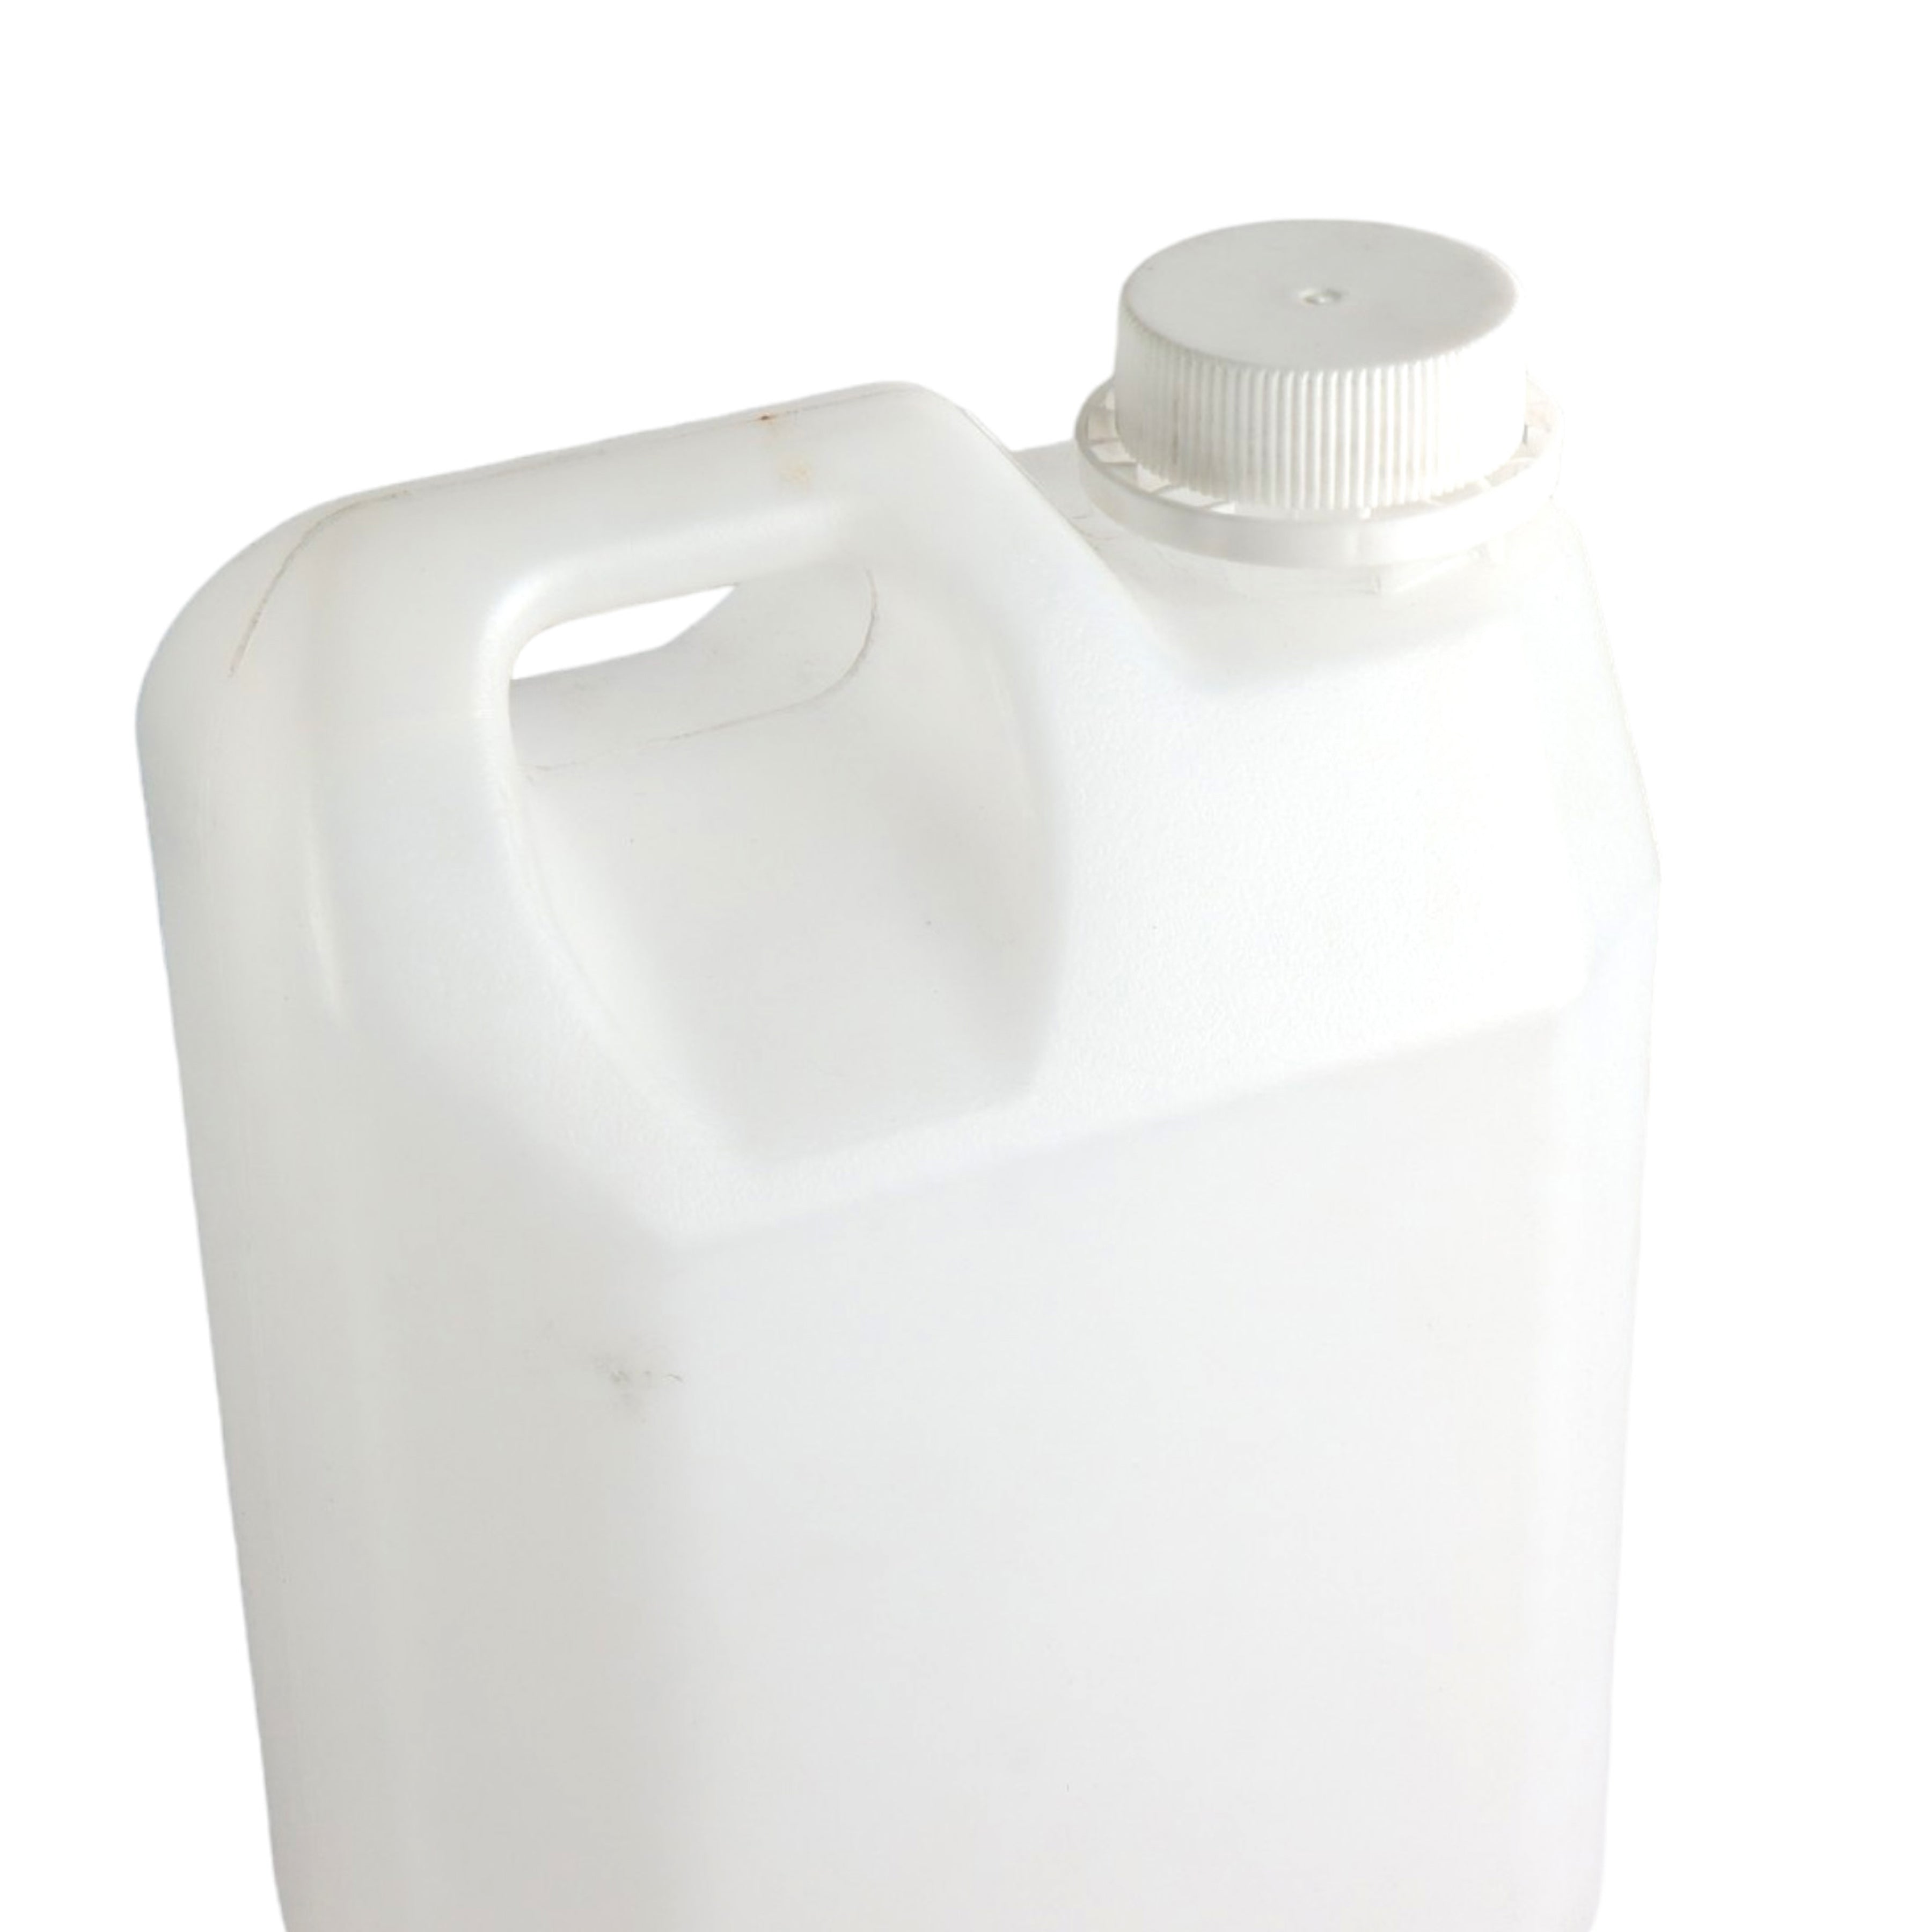 2L Plastic Jerry Can 180g with Cap Natural